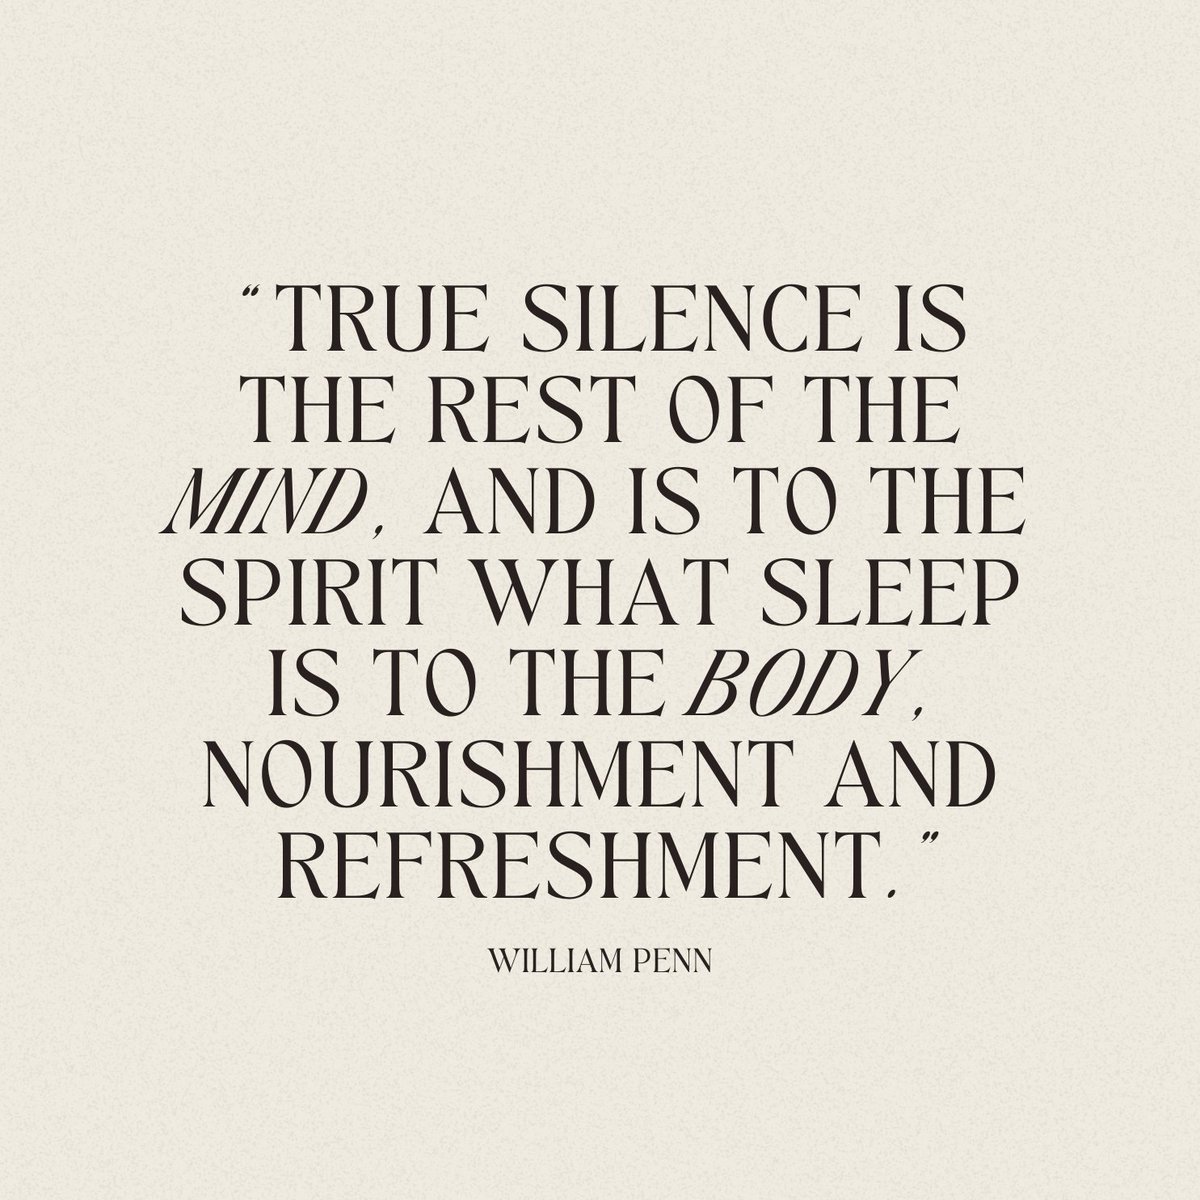 Pause for a moment today and embrace true silence; observe the calming impact it has on your mind. Just like your body, your mind craves rest. Give it the serenity it deserves🌿🧘‍♂️ 

#quoteoftheday #quotestoliveby #inspiringquotes #peacefulquotes #chillpalm #chillpalmsounds